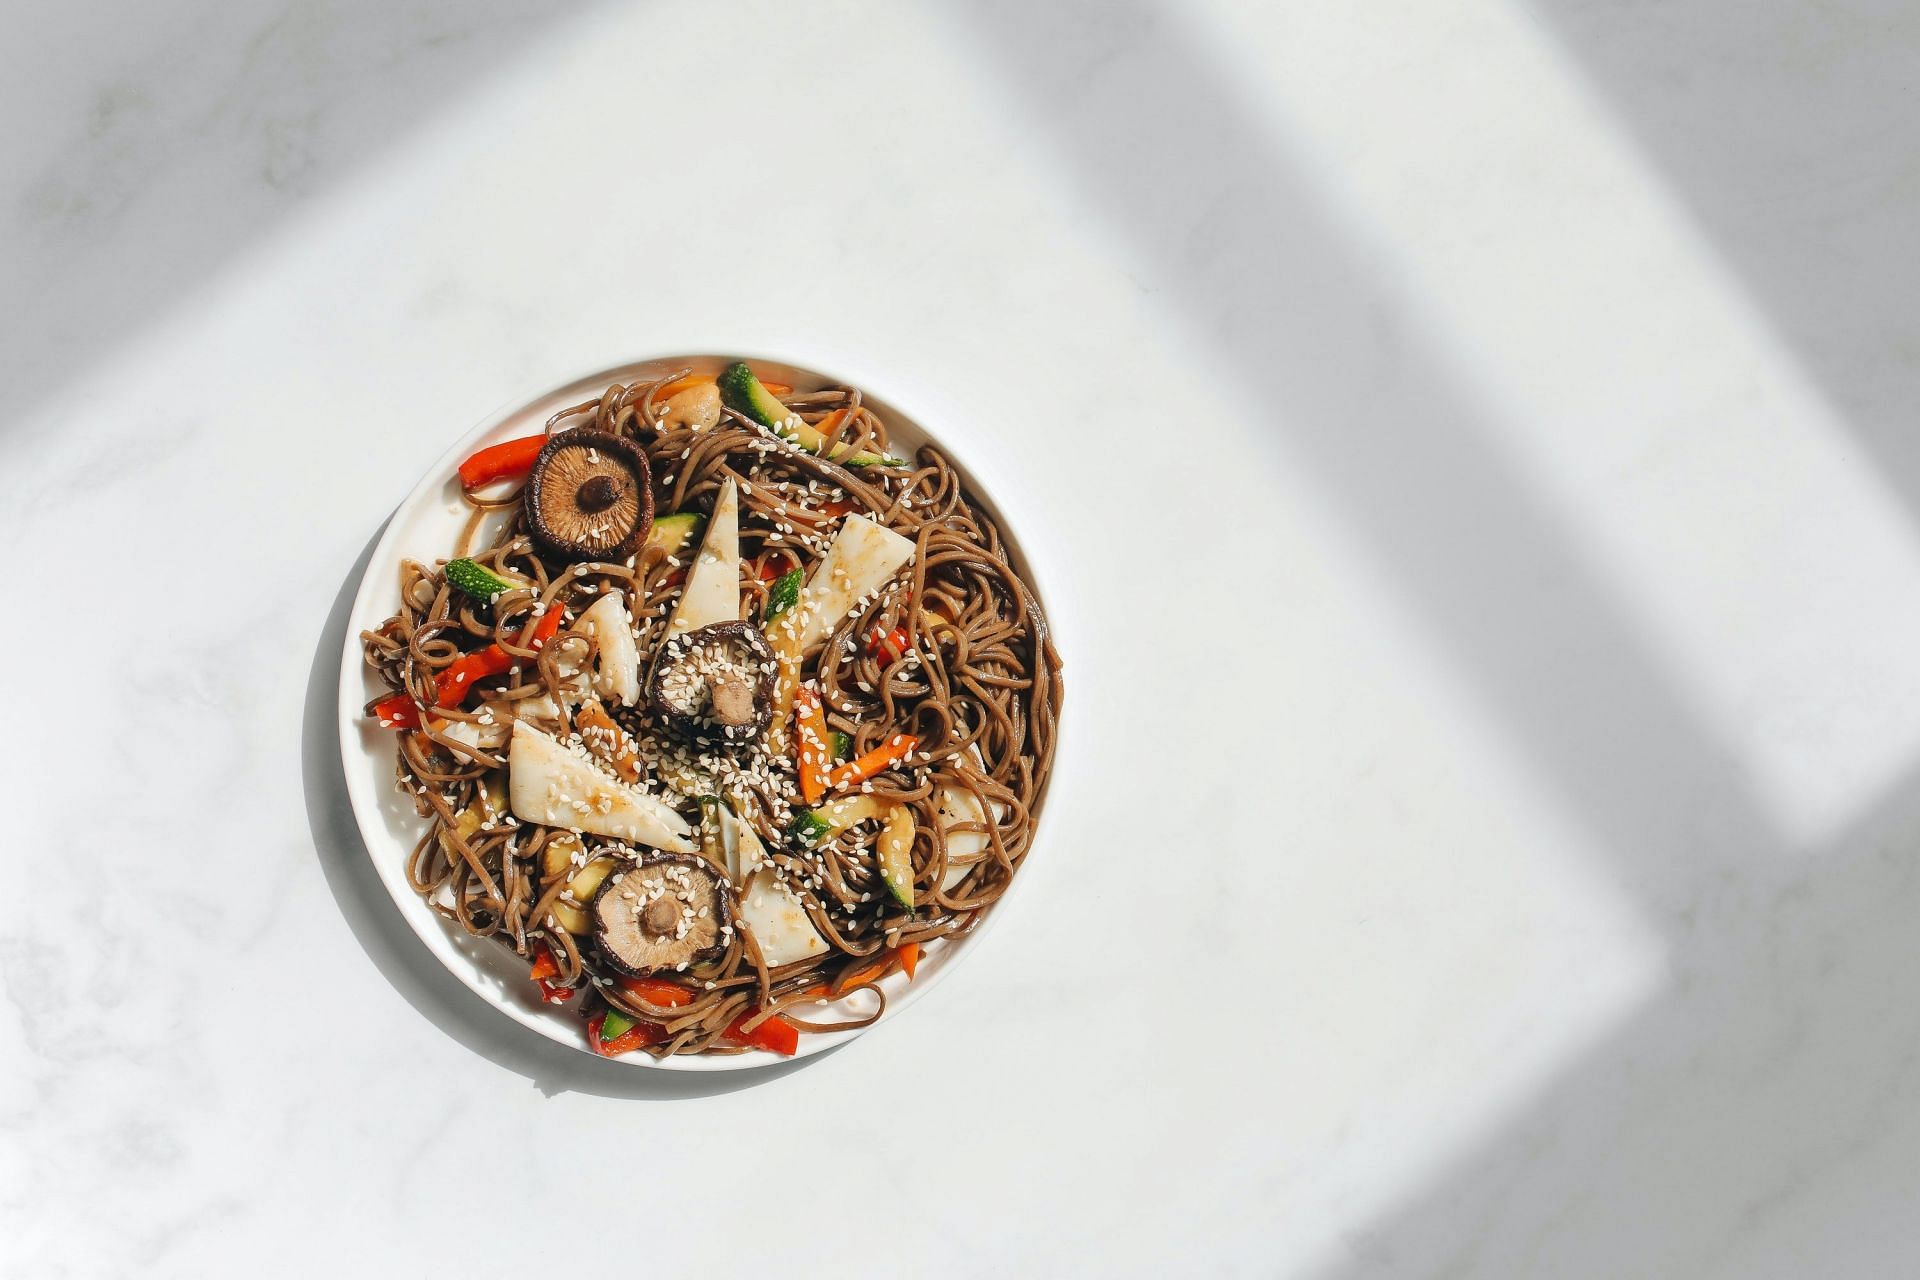 Buckwheat noodles are an excellent healthy option to include minerals, antioxidants and fiber in your meal (Image via Pexels @Polina Tankilevitch)